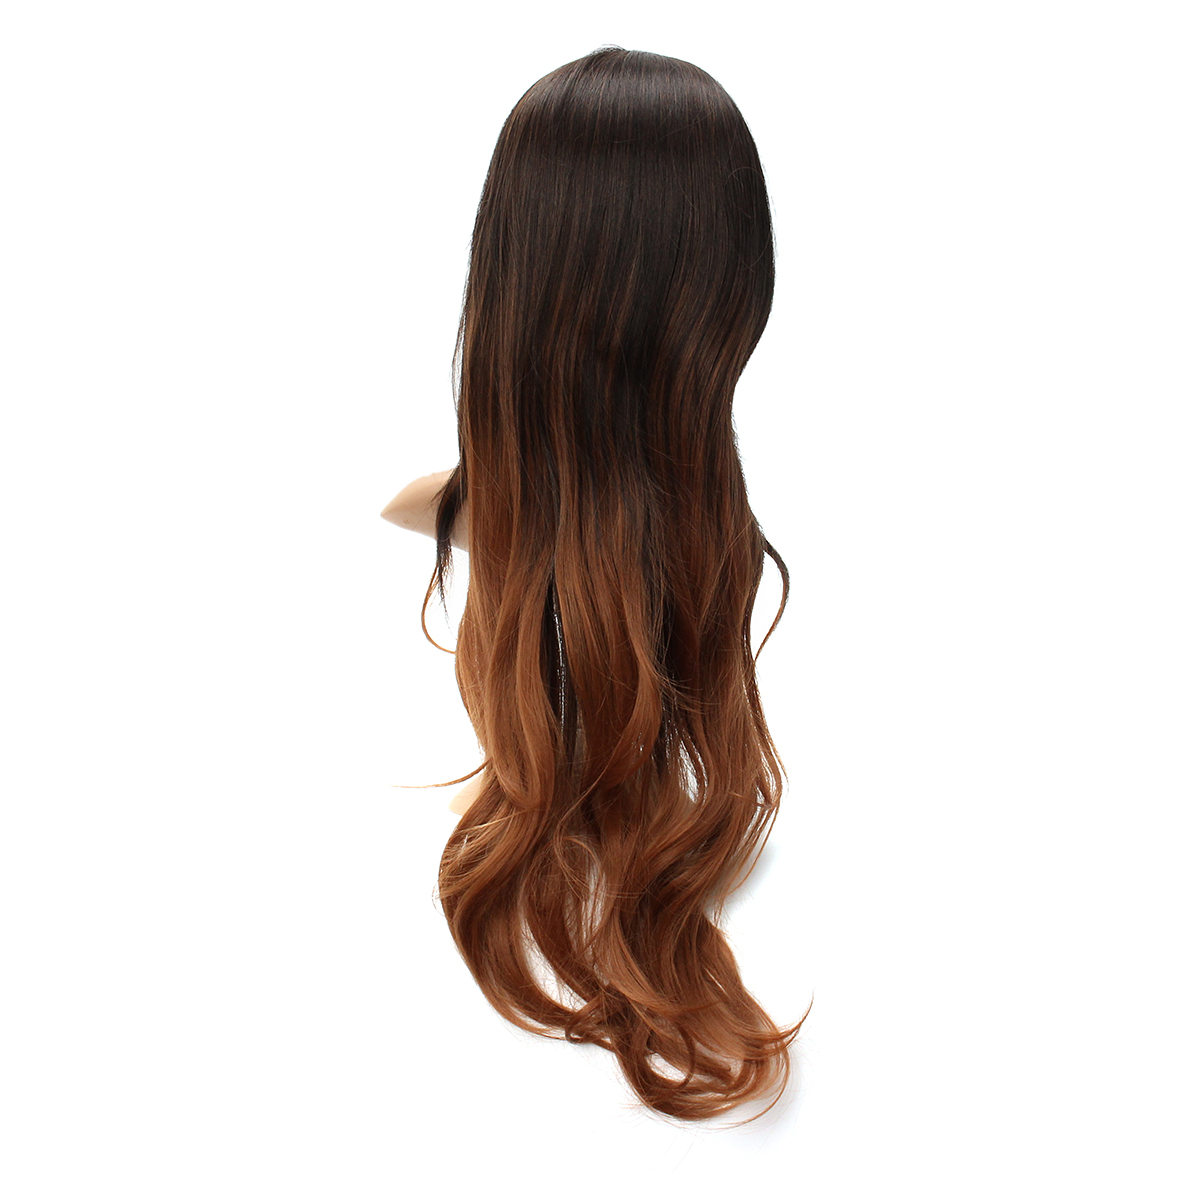 Womens-Long-Wavy-Curly-Hair-Synthetic-Wig-Black-Brown-Ombre-Cosplay-Party-Wig-1354613-3